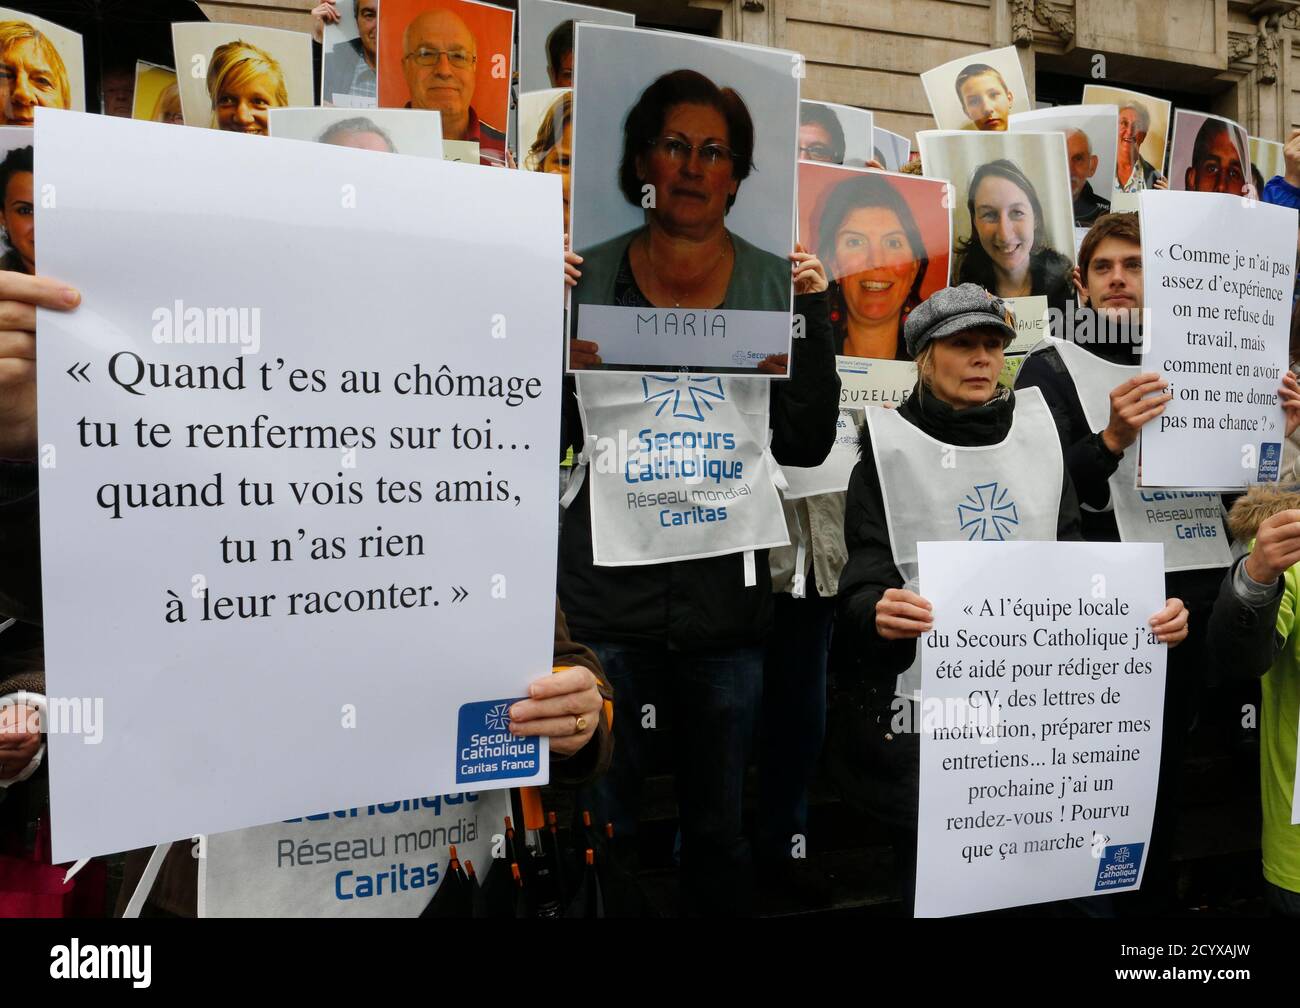 Members of the charity organization Secours Catholique hold portraits of jobless and precarious people during a demonstration against precariousness on the steps of the Opera in Lille, Northen France, November 7, 2013.    REUTERS/Pascal Rossignol   (FRANCE - Tags: BUSINESS EMPLOYMENT SOCIETY POVERTY) Stock Photo